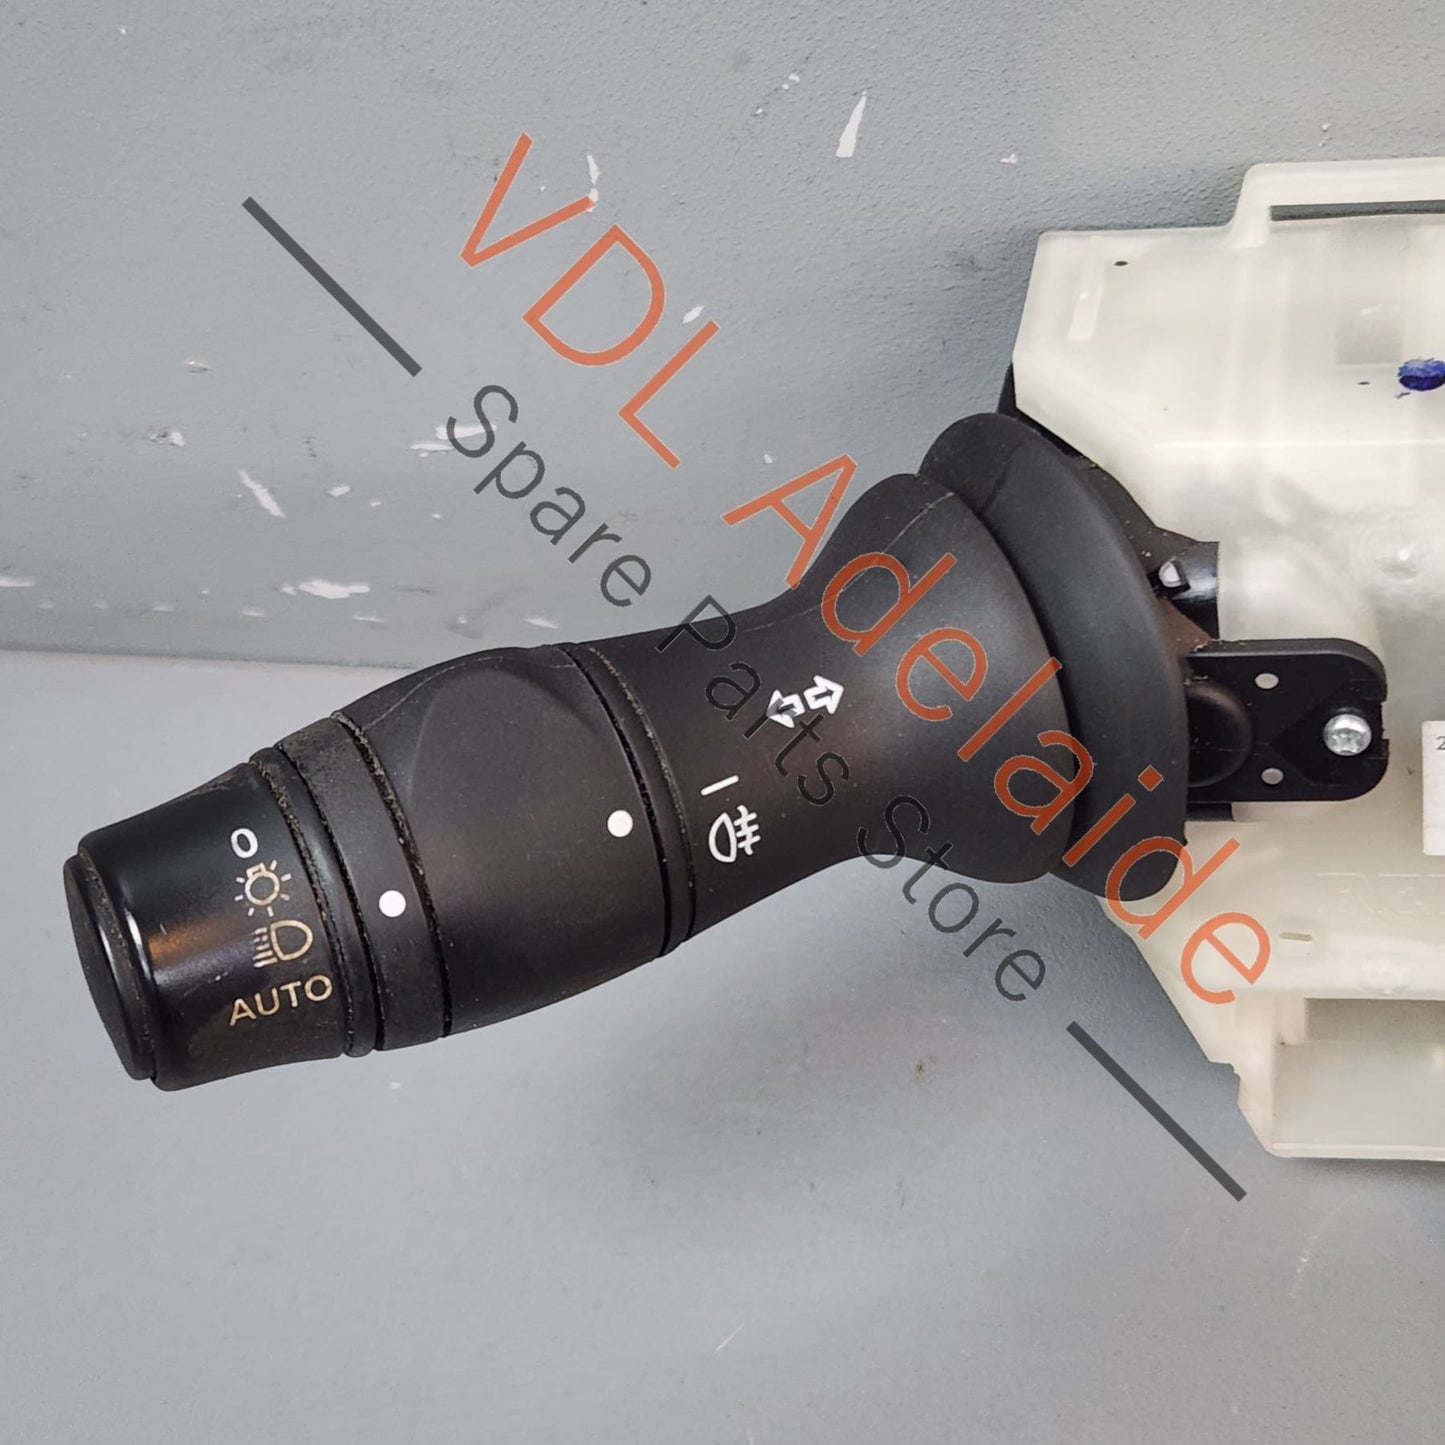 Renault Megane Combination Switch Stalk for Wipers Indicators Lights